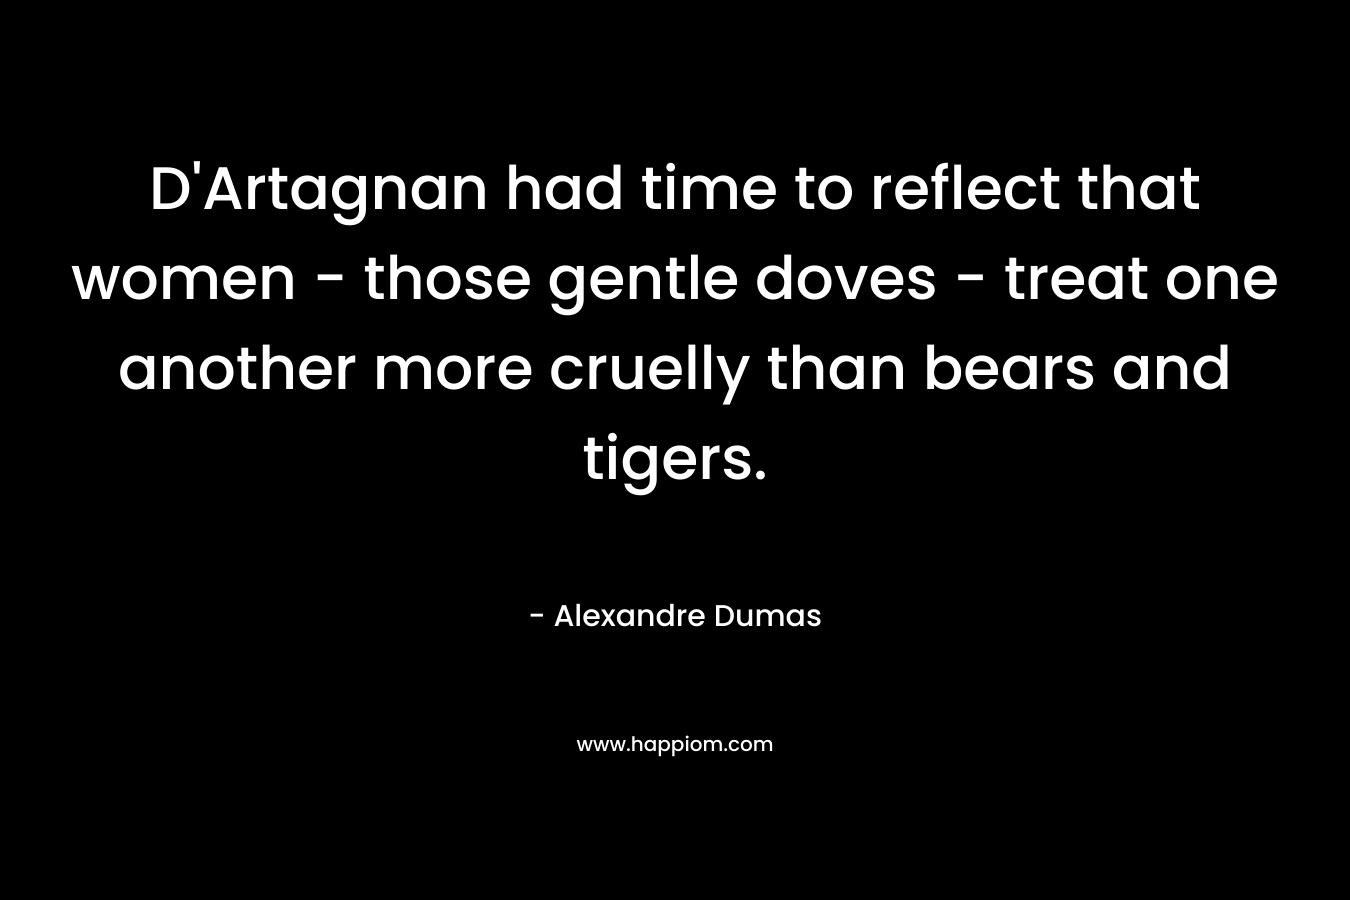 D’Artagnan had time to reflect that women – those gentle doves – treat one another more cruelly than bears and tigers. – Alexandre Dumas